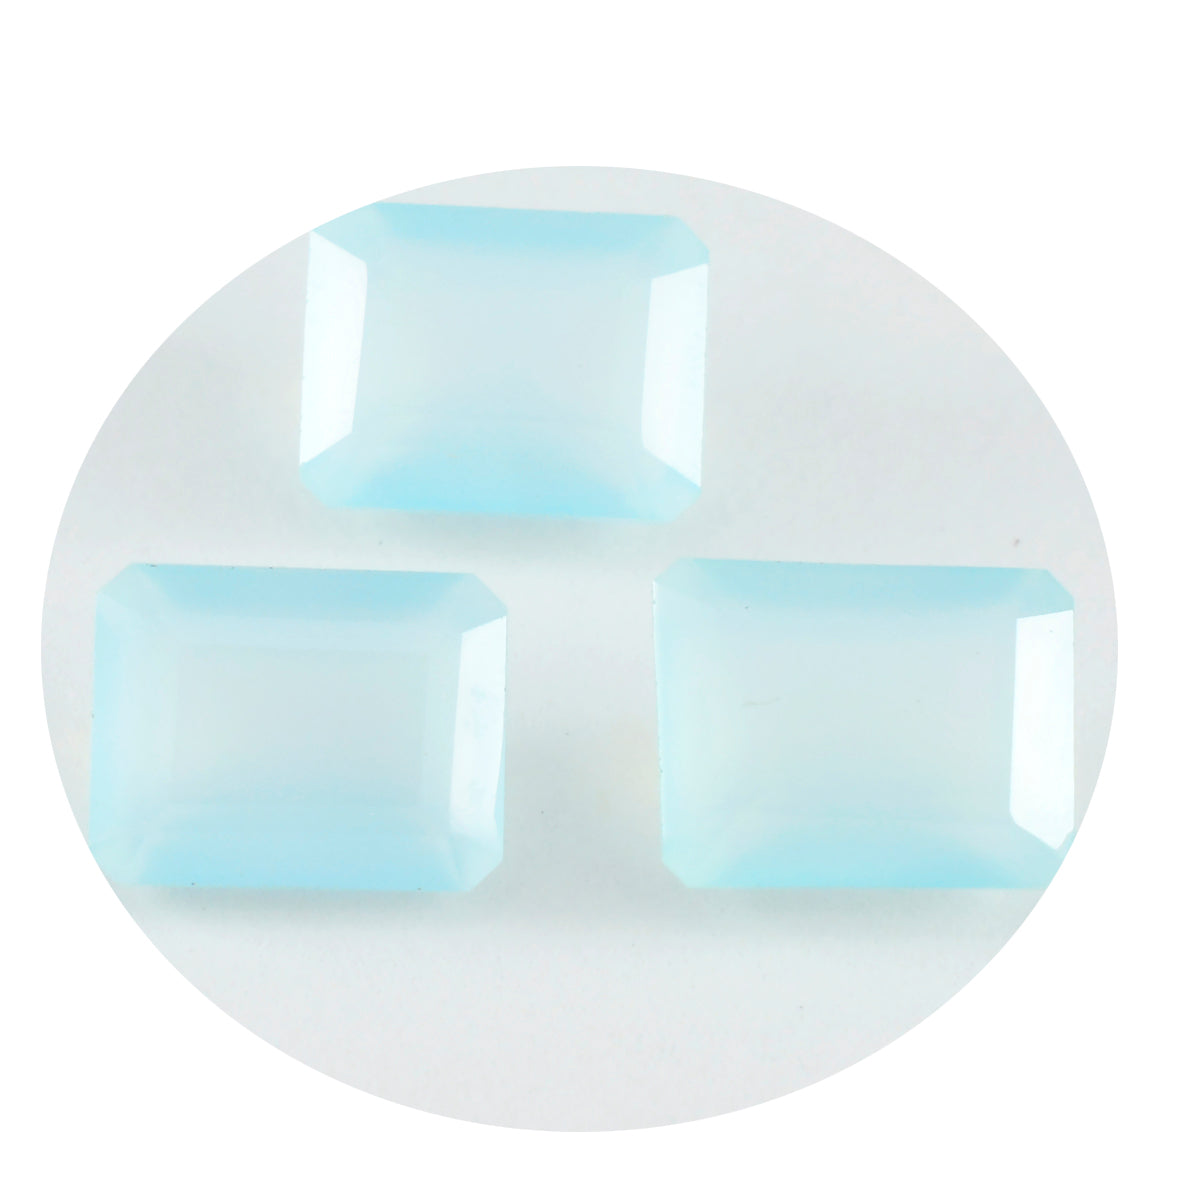 Riyogems 1PC Natural Aqua Chalcedony Faceted 9x11 mm Octagon Shape good-looking Quality Loose Gem